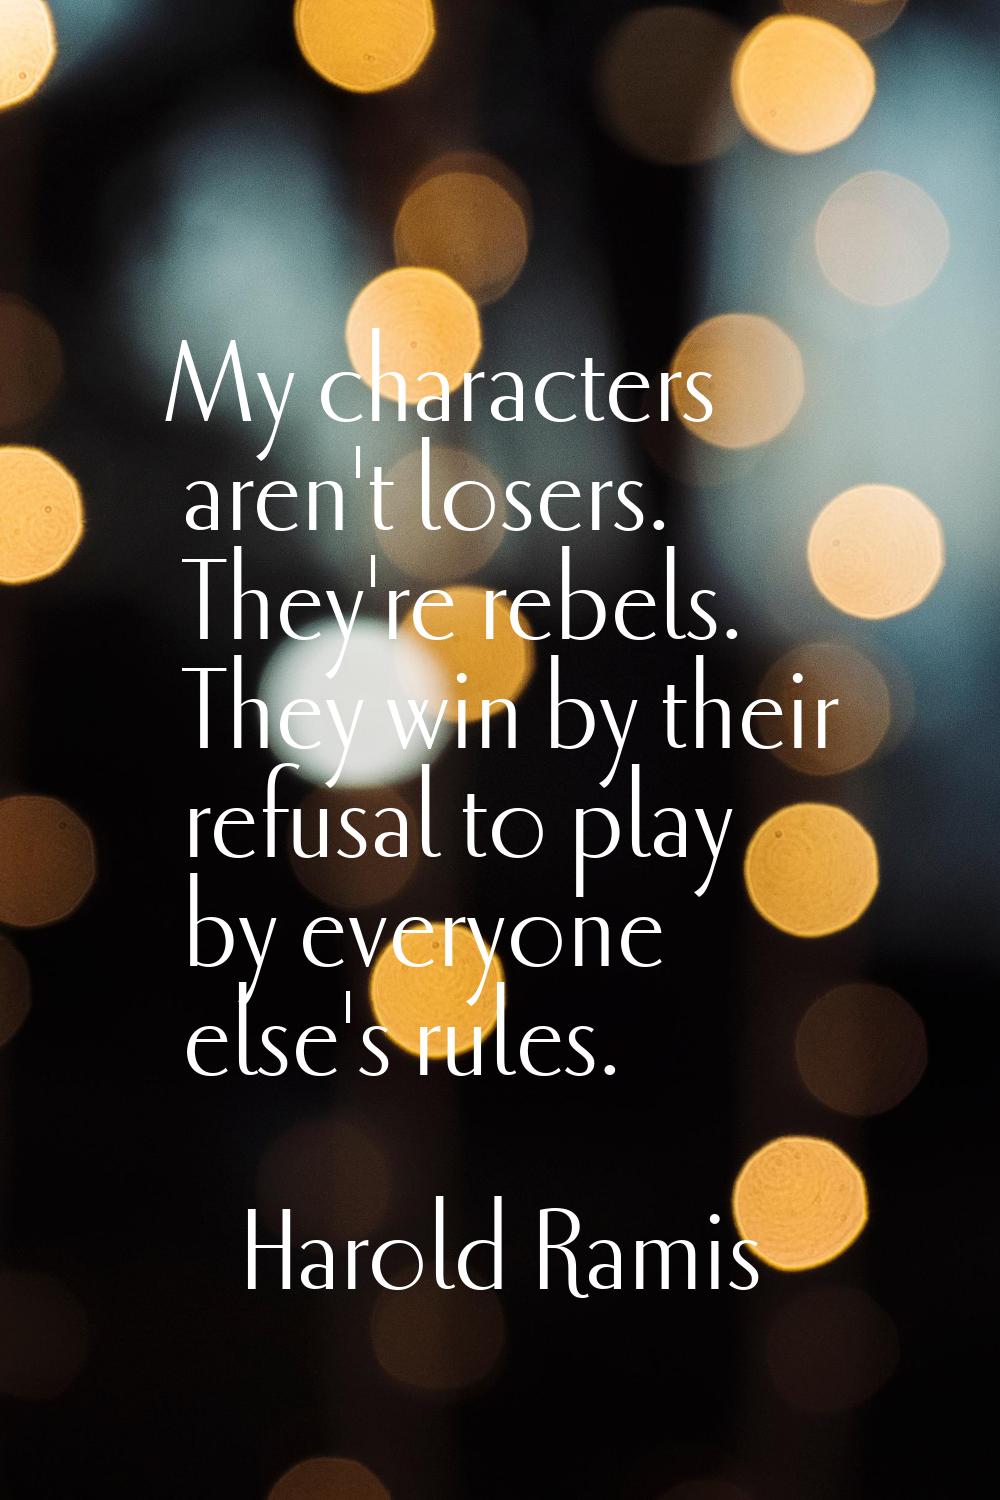 My characters aren't losers. They're rebels. They win by their refusal to play by everyone else's r